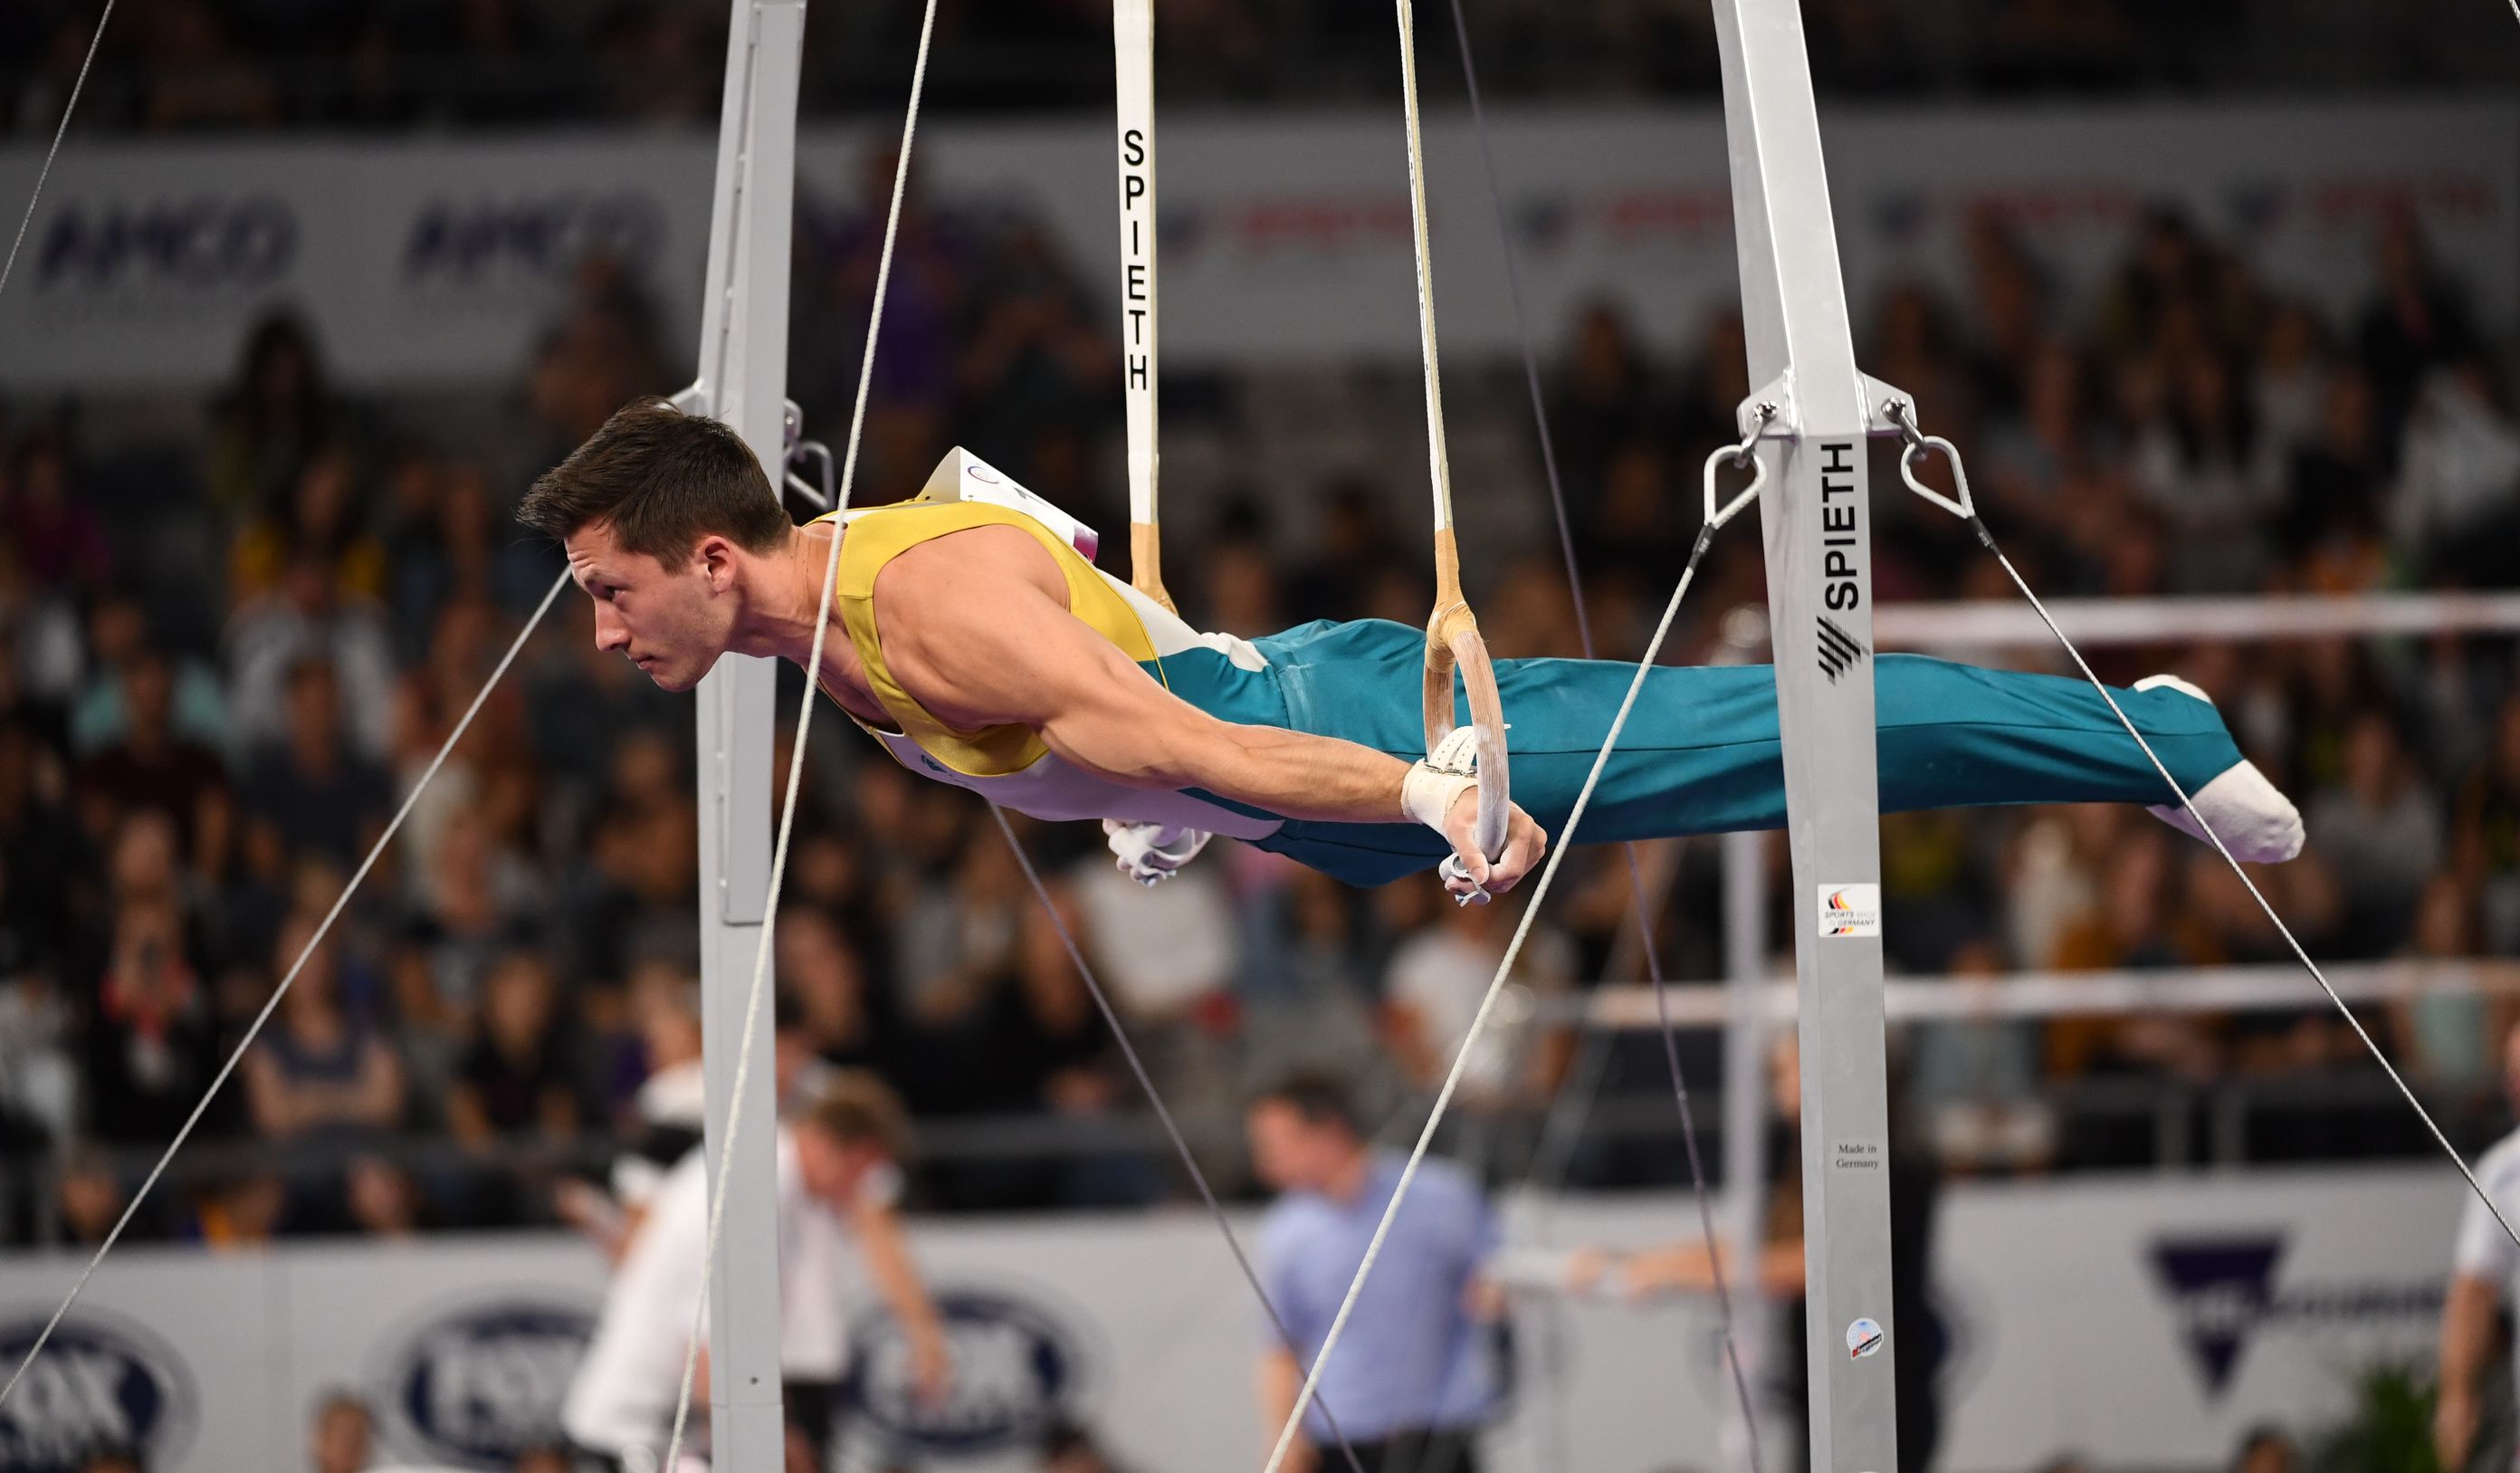 Gymnastics World Cup returns to Melbourne this month